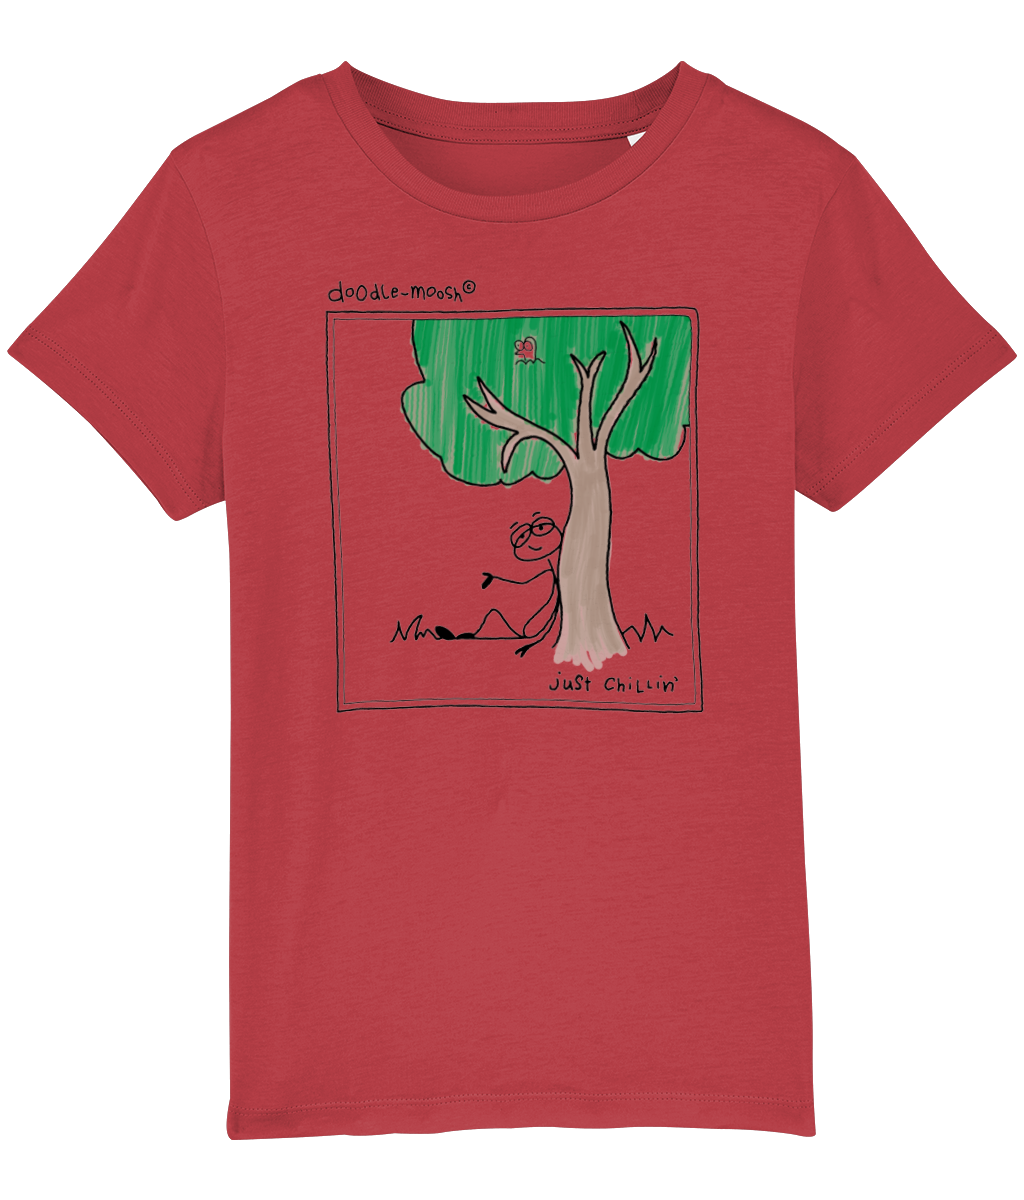 Just chilling t-shirt, red with black, colorful drawing